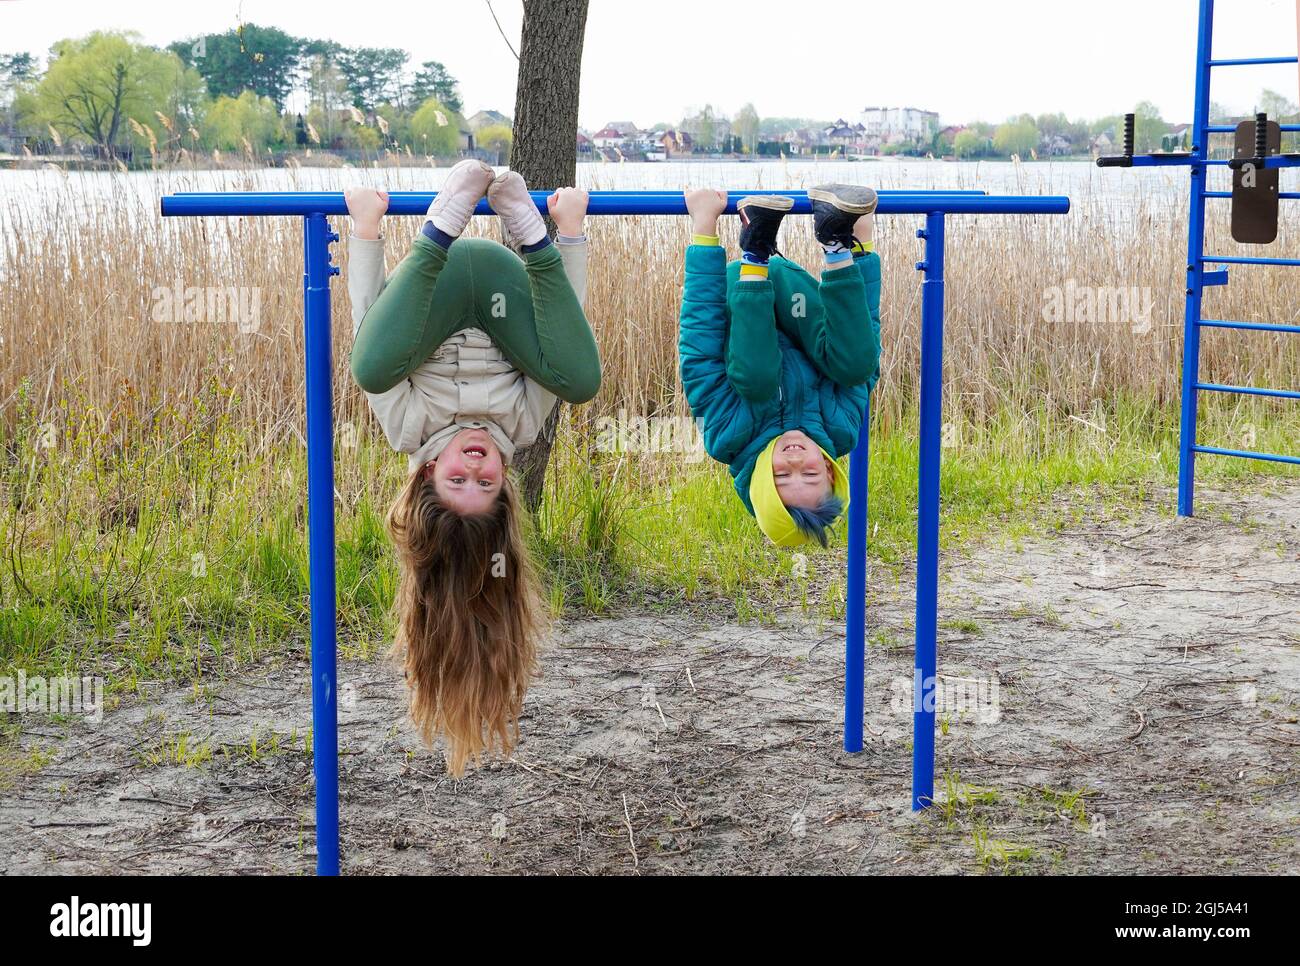 Two young children sibling having fun on the sport playground. Stock Photo